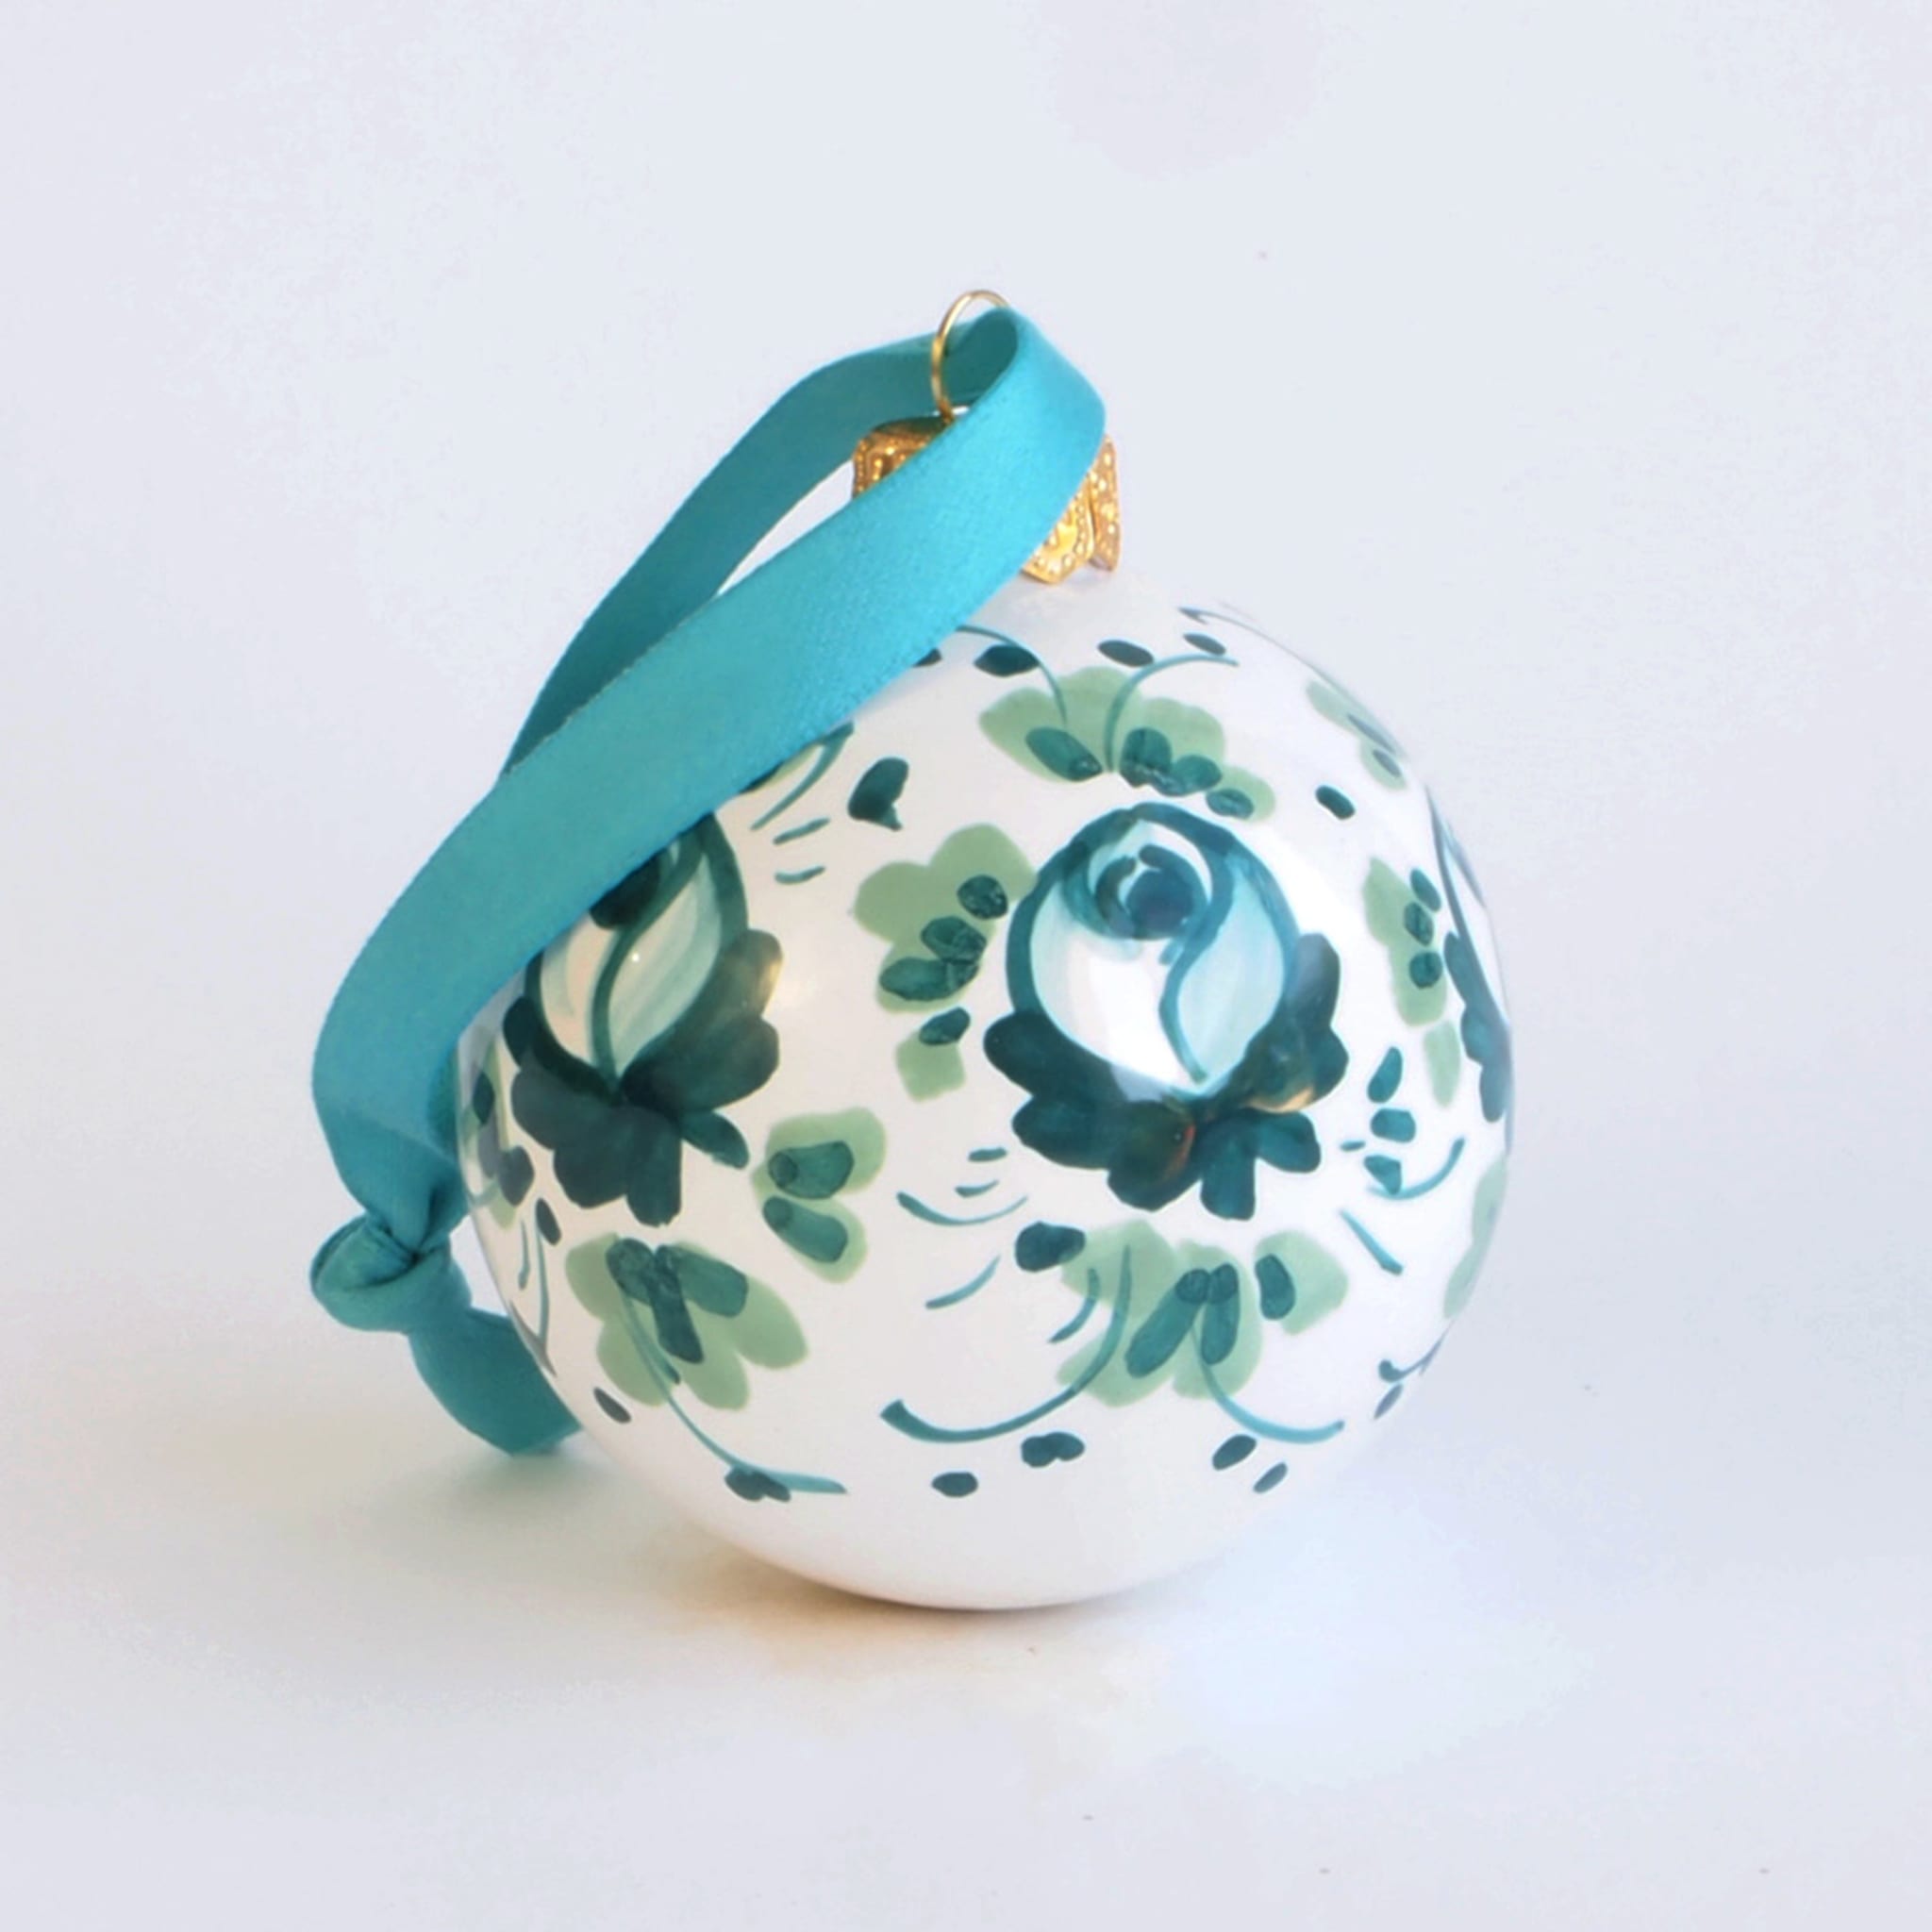 Turquoise Floral Christmas Ball Ornament #2 - Alternative view 1